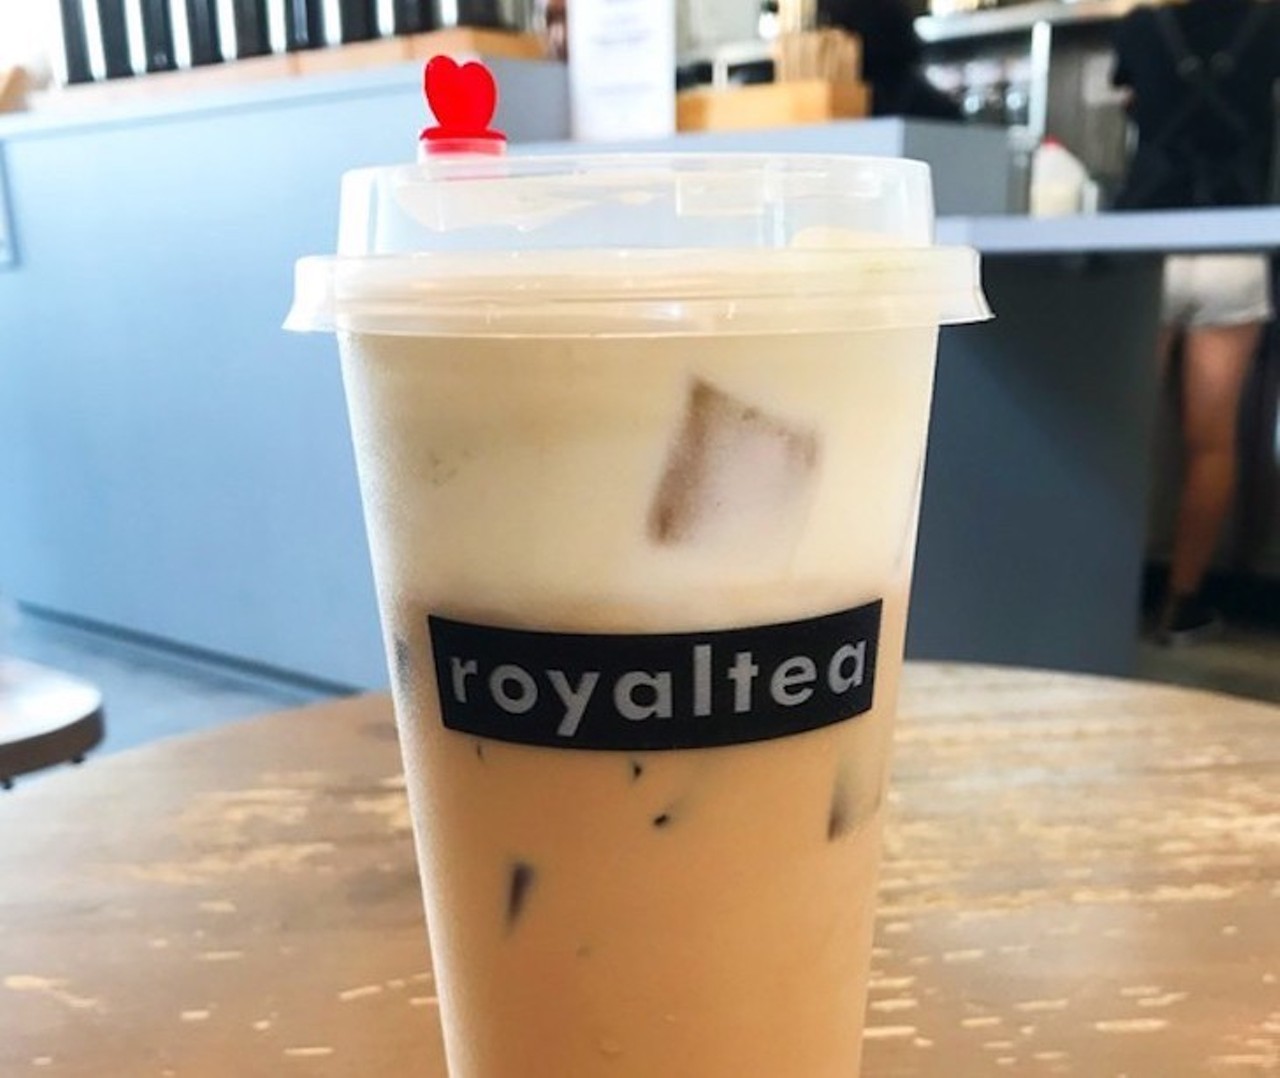 Royal Tea Orlando 
714 N. Mills Ave., Florida 32803, info@royalteaus.com
The specialty cheese mousse tea and traditional bubble teas plus more are available to takeout or delivery through uber eats.
Photo via Melissa McHenry/Orlando Weekly